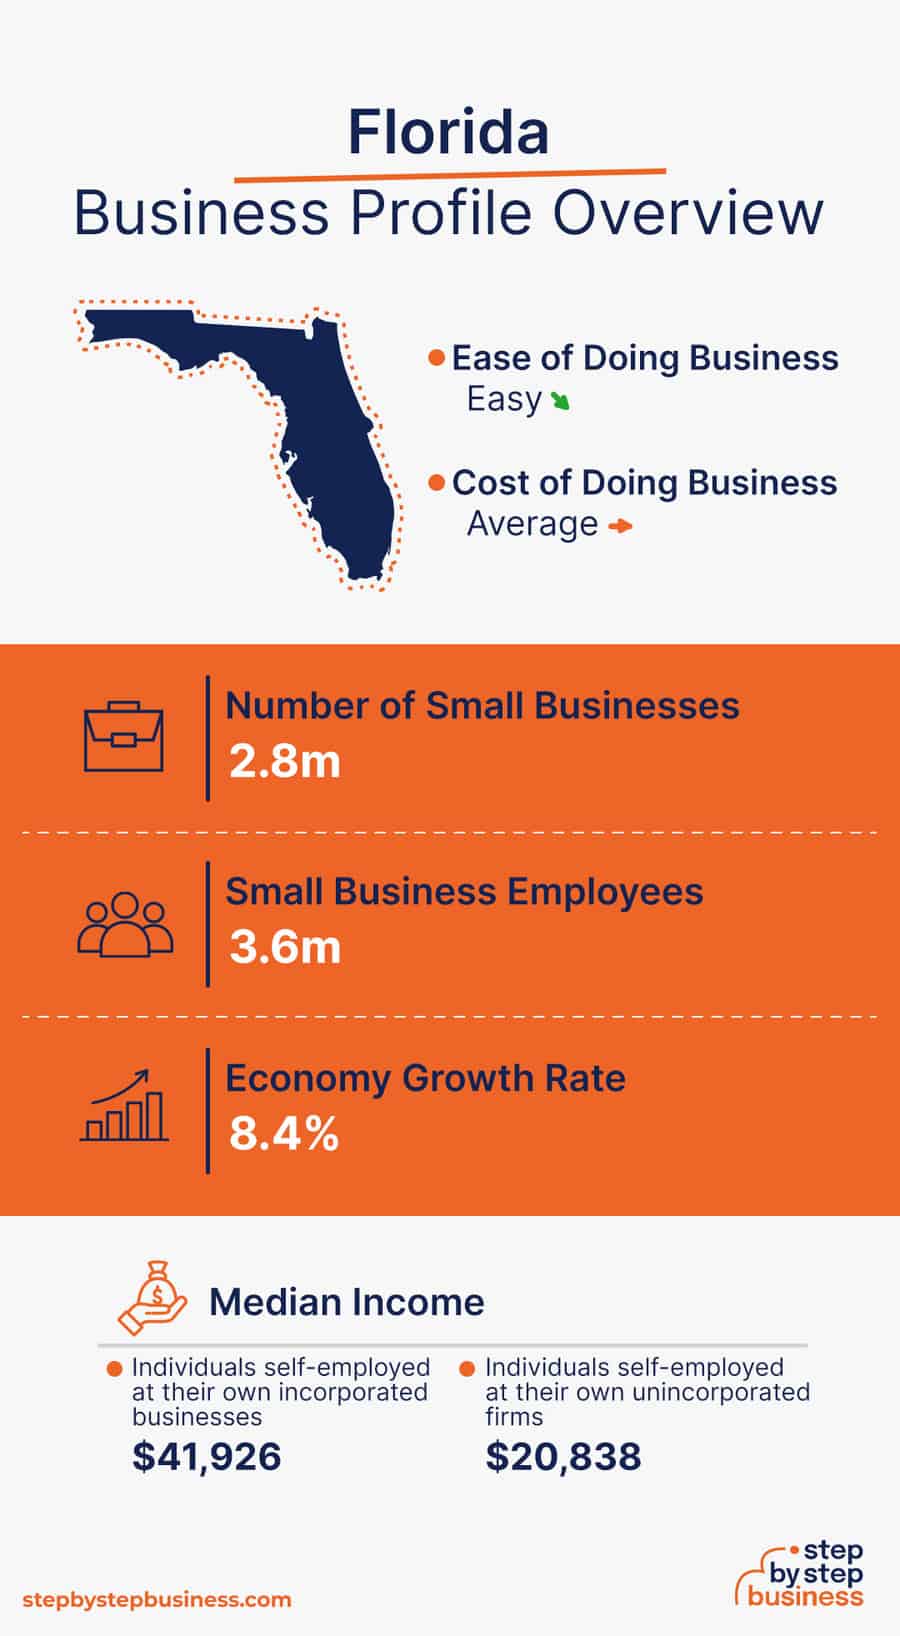 Florida Business Profile Overview